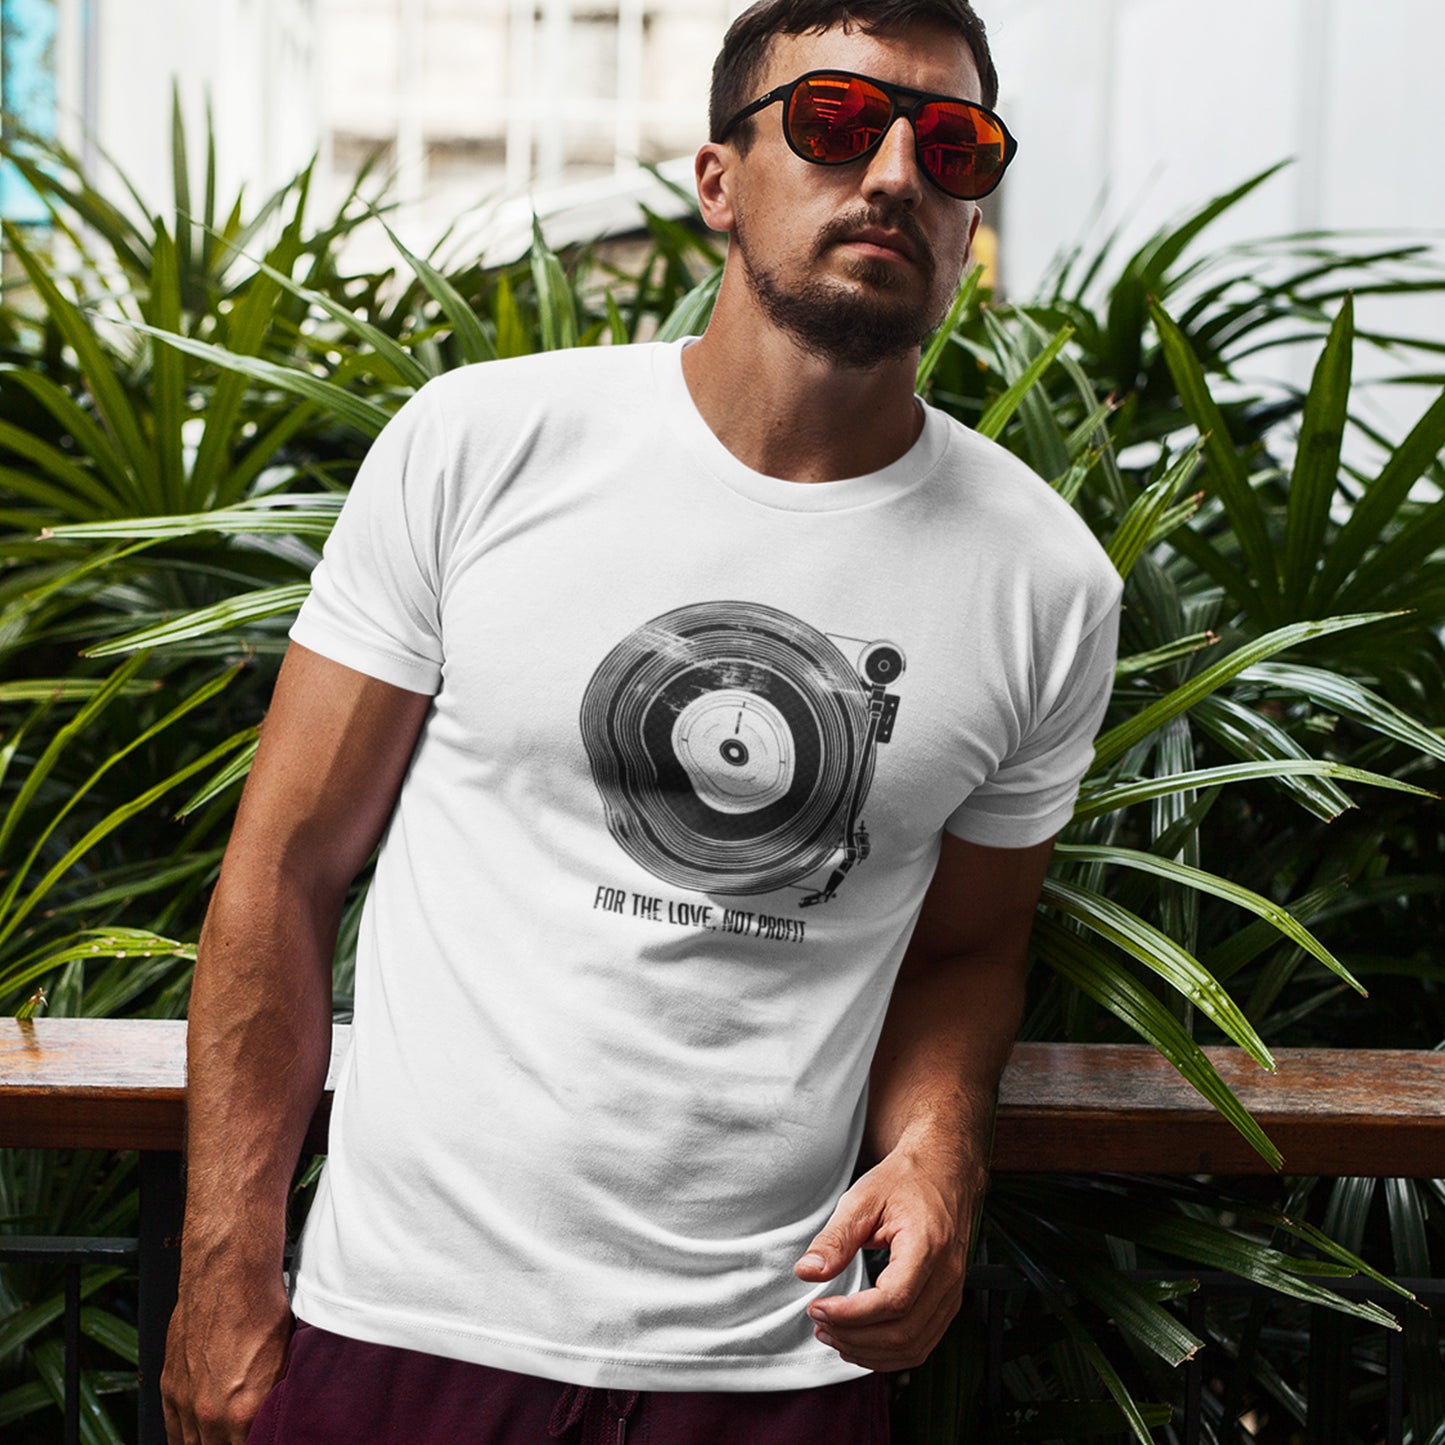 For The Love Unisex organic cotton t-shirt- white- worn by male model outdoors